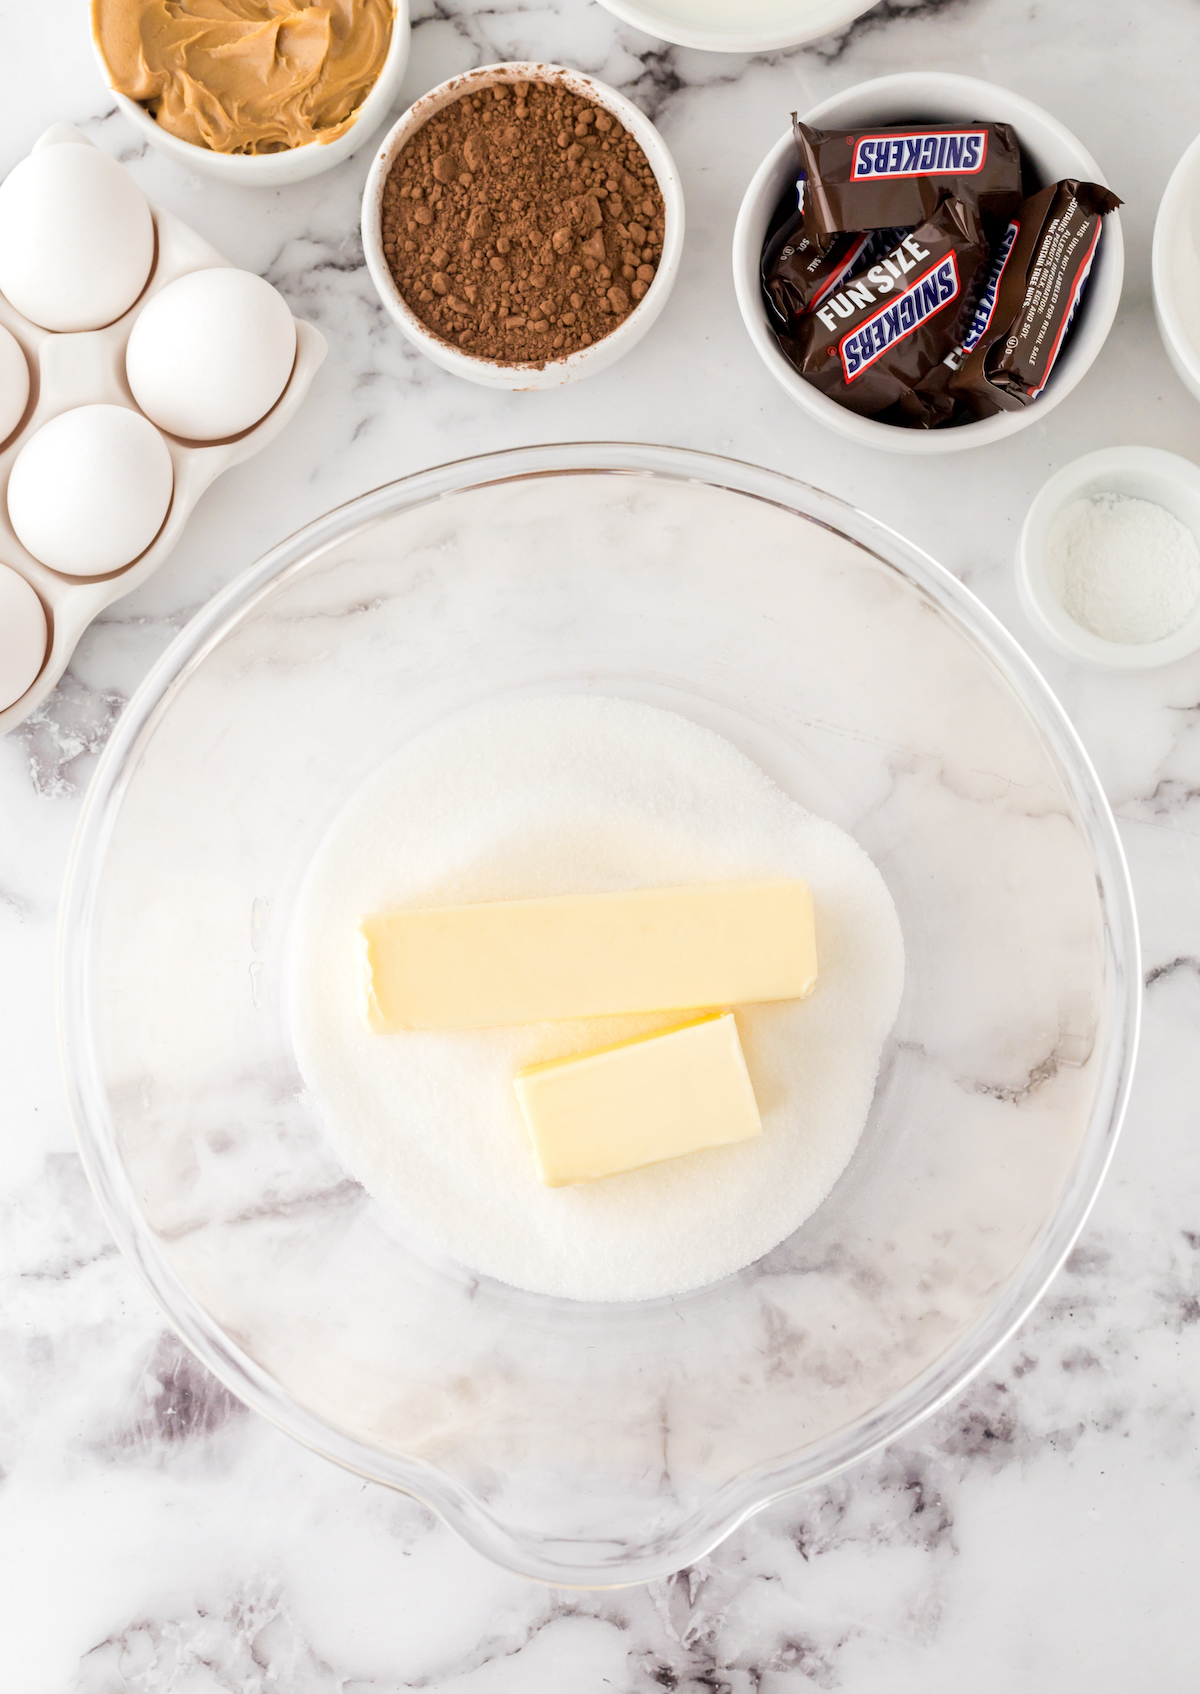 cream the butter and sugars together in a glass bowl